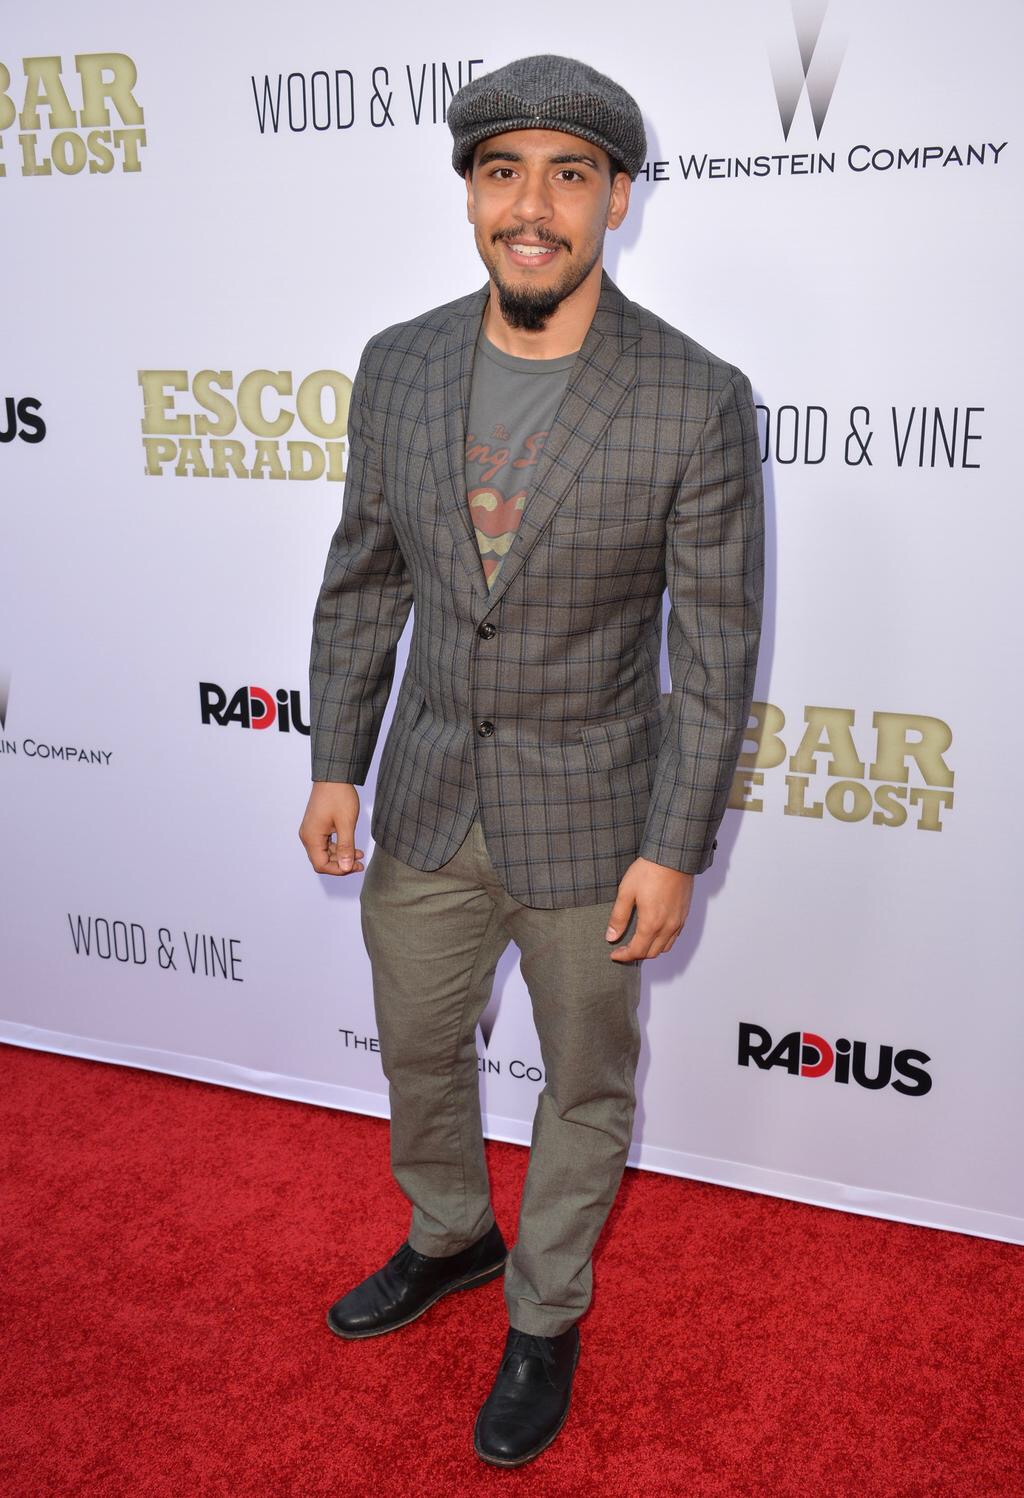 Victor Rasuk attends the premiere of 'Escobar: Paradise Lost' in Los Angeles, California on June 22, 2015.